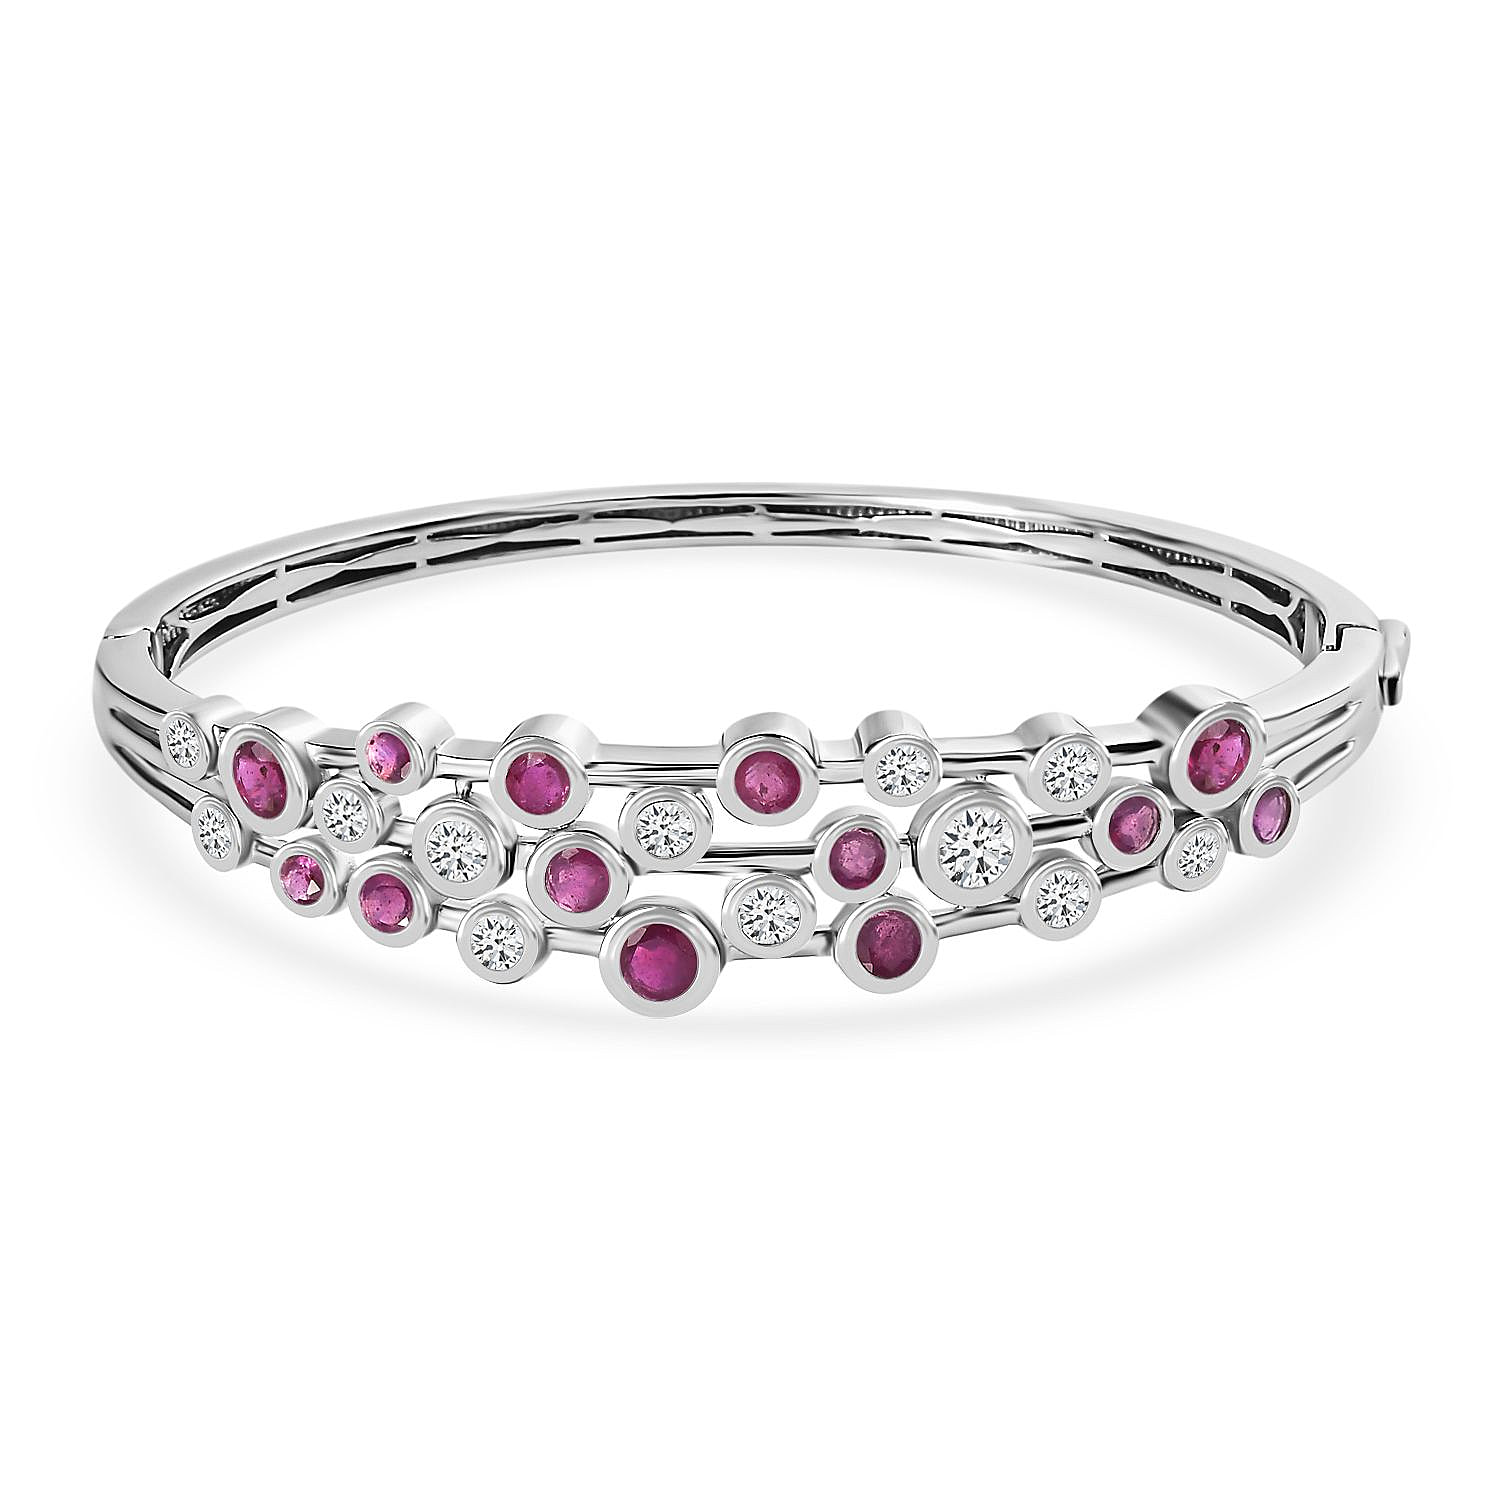 African Ruby & Moissanite Bangle (Size 7.5) in Platinum Overlay Sterling Silver 7.40 Ct, Silver Wt. 21.45 Gms